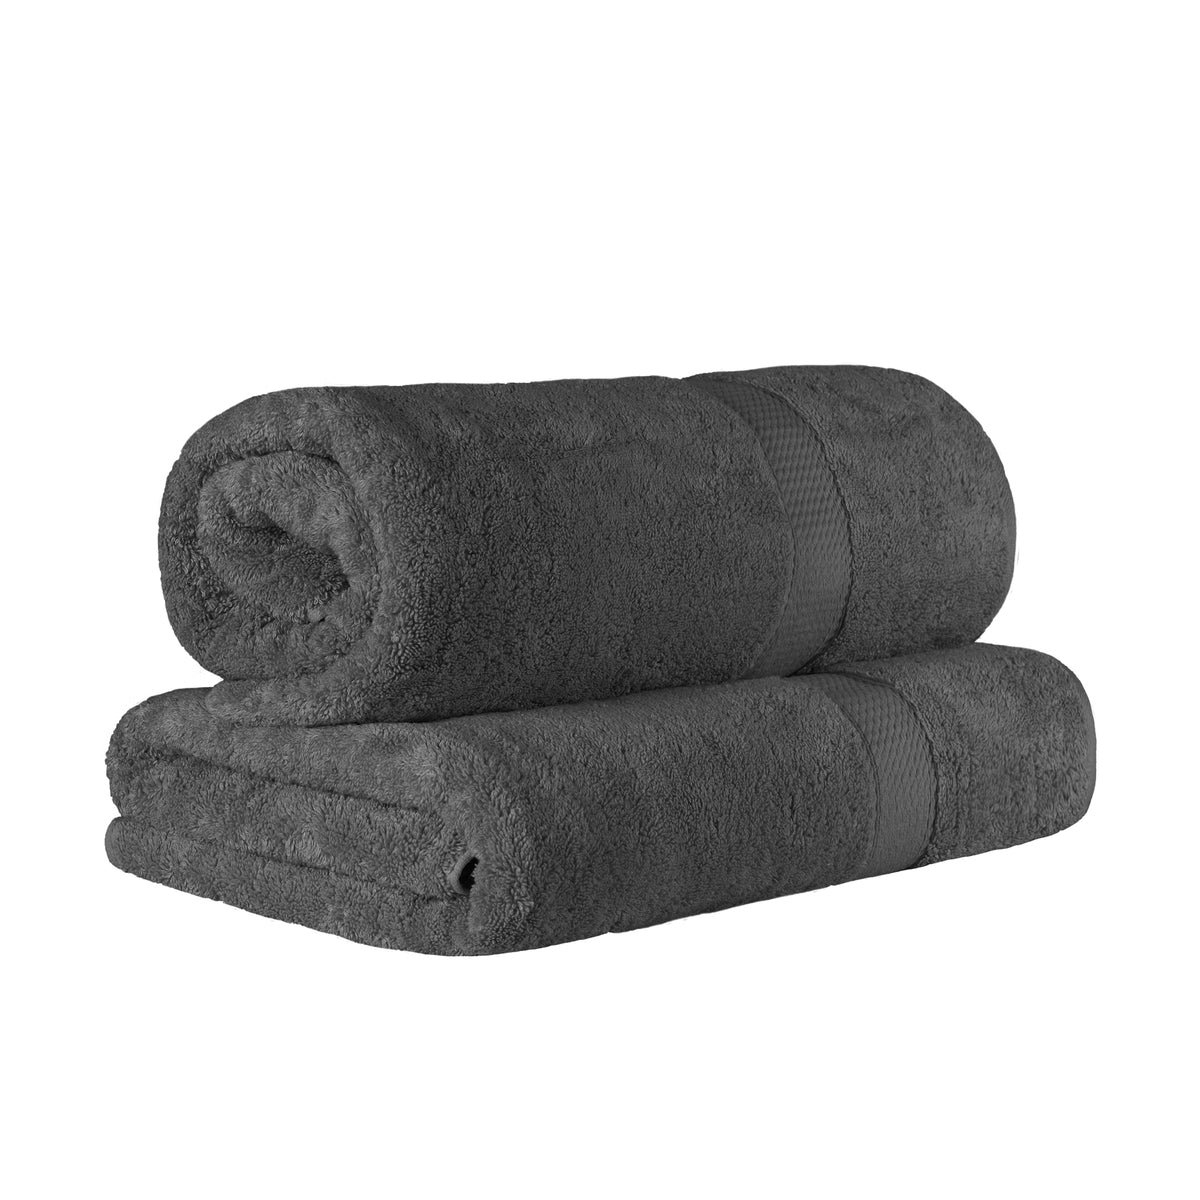 Egyptian Cotton Highly Absorbent 2 Piece Ultra-Plush Solid Bath Sheet Set - Charcoal